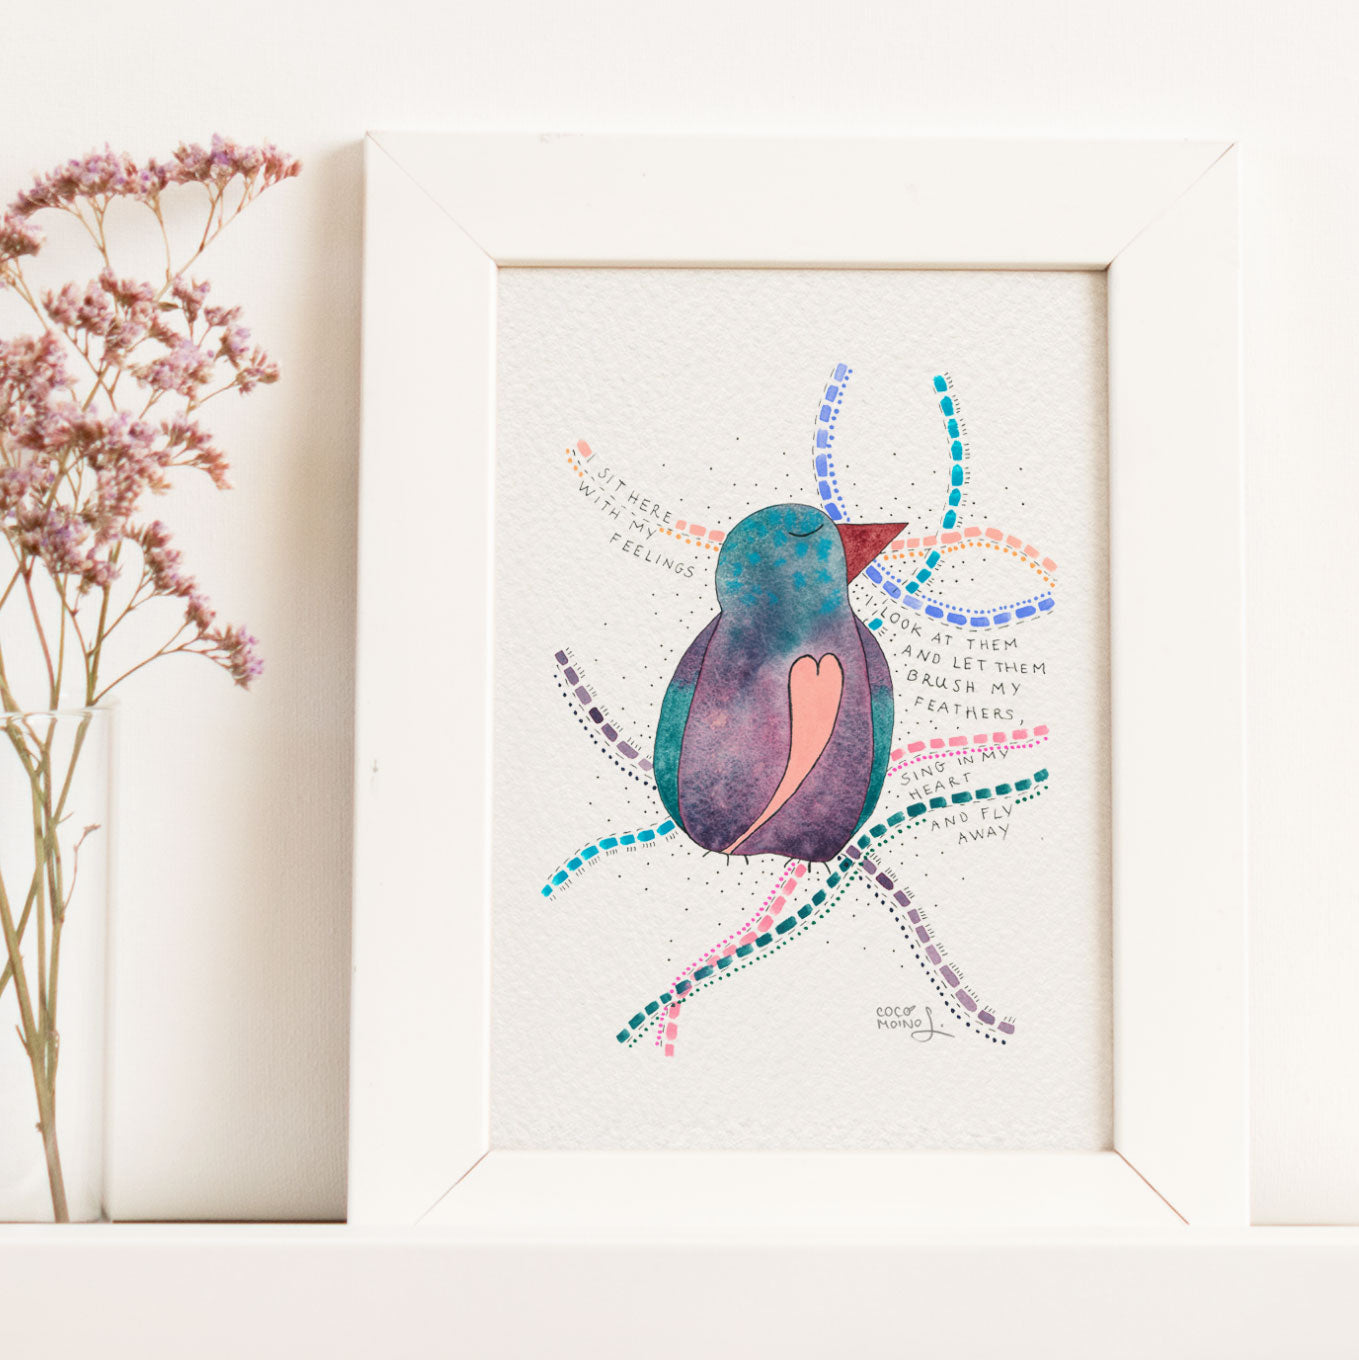 Watercolor self-care art with a bird, with words on how to sit with our feelings